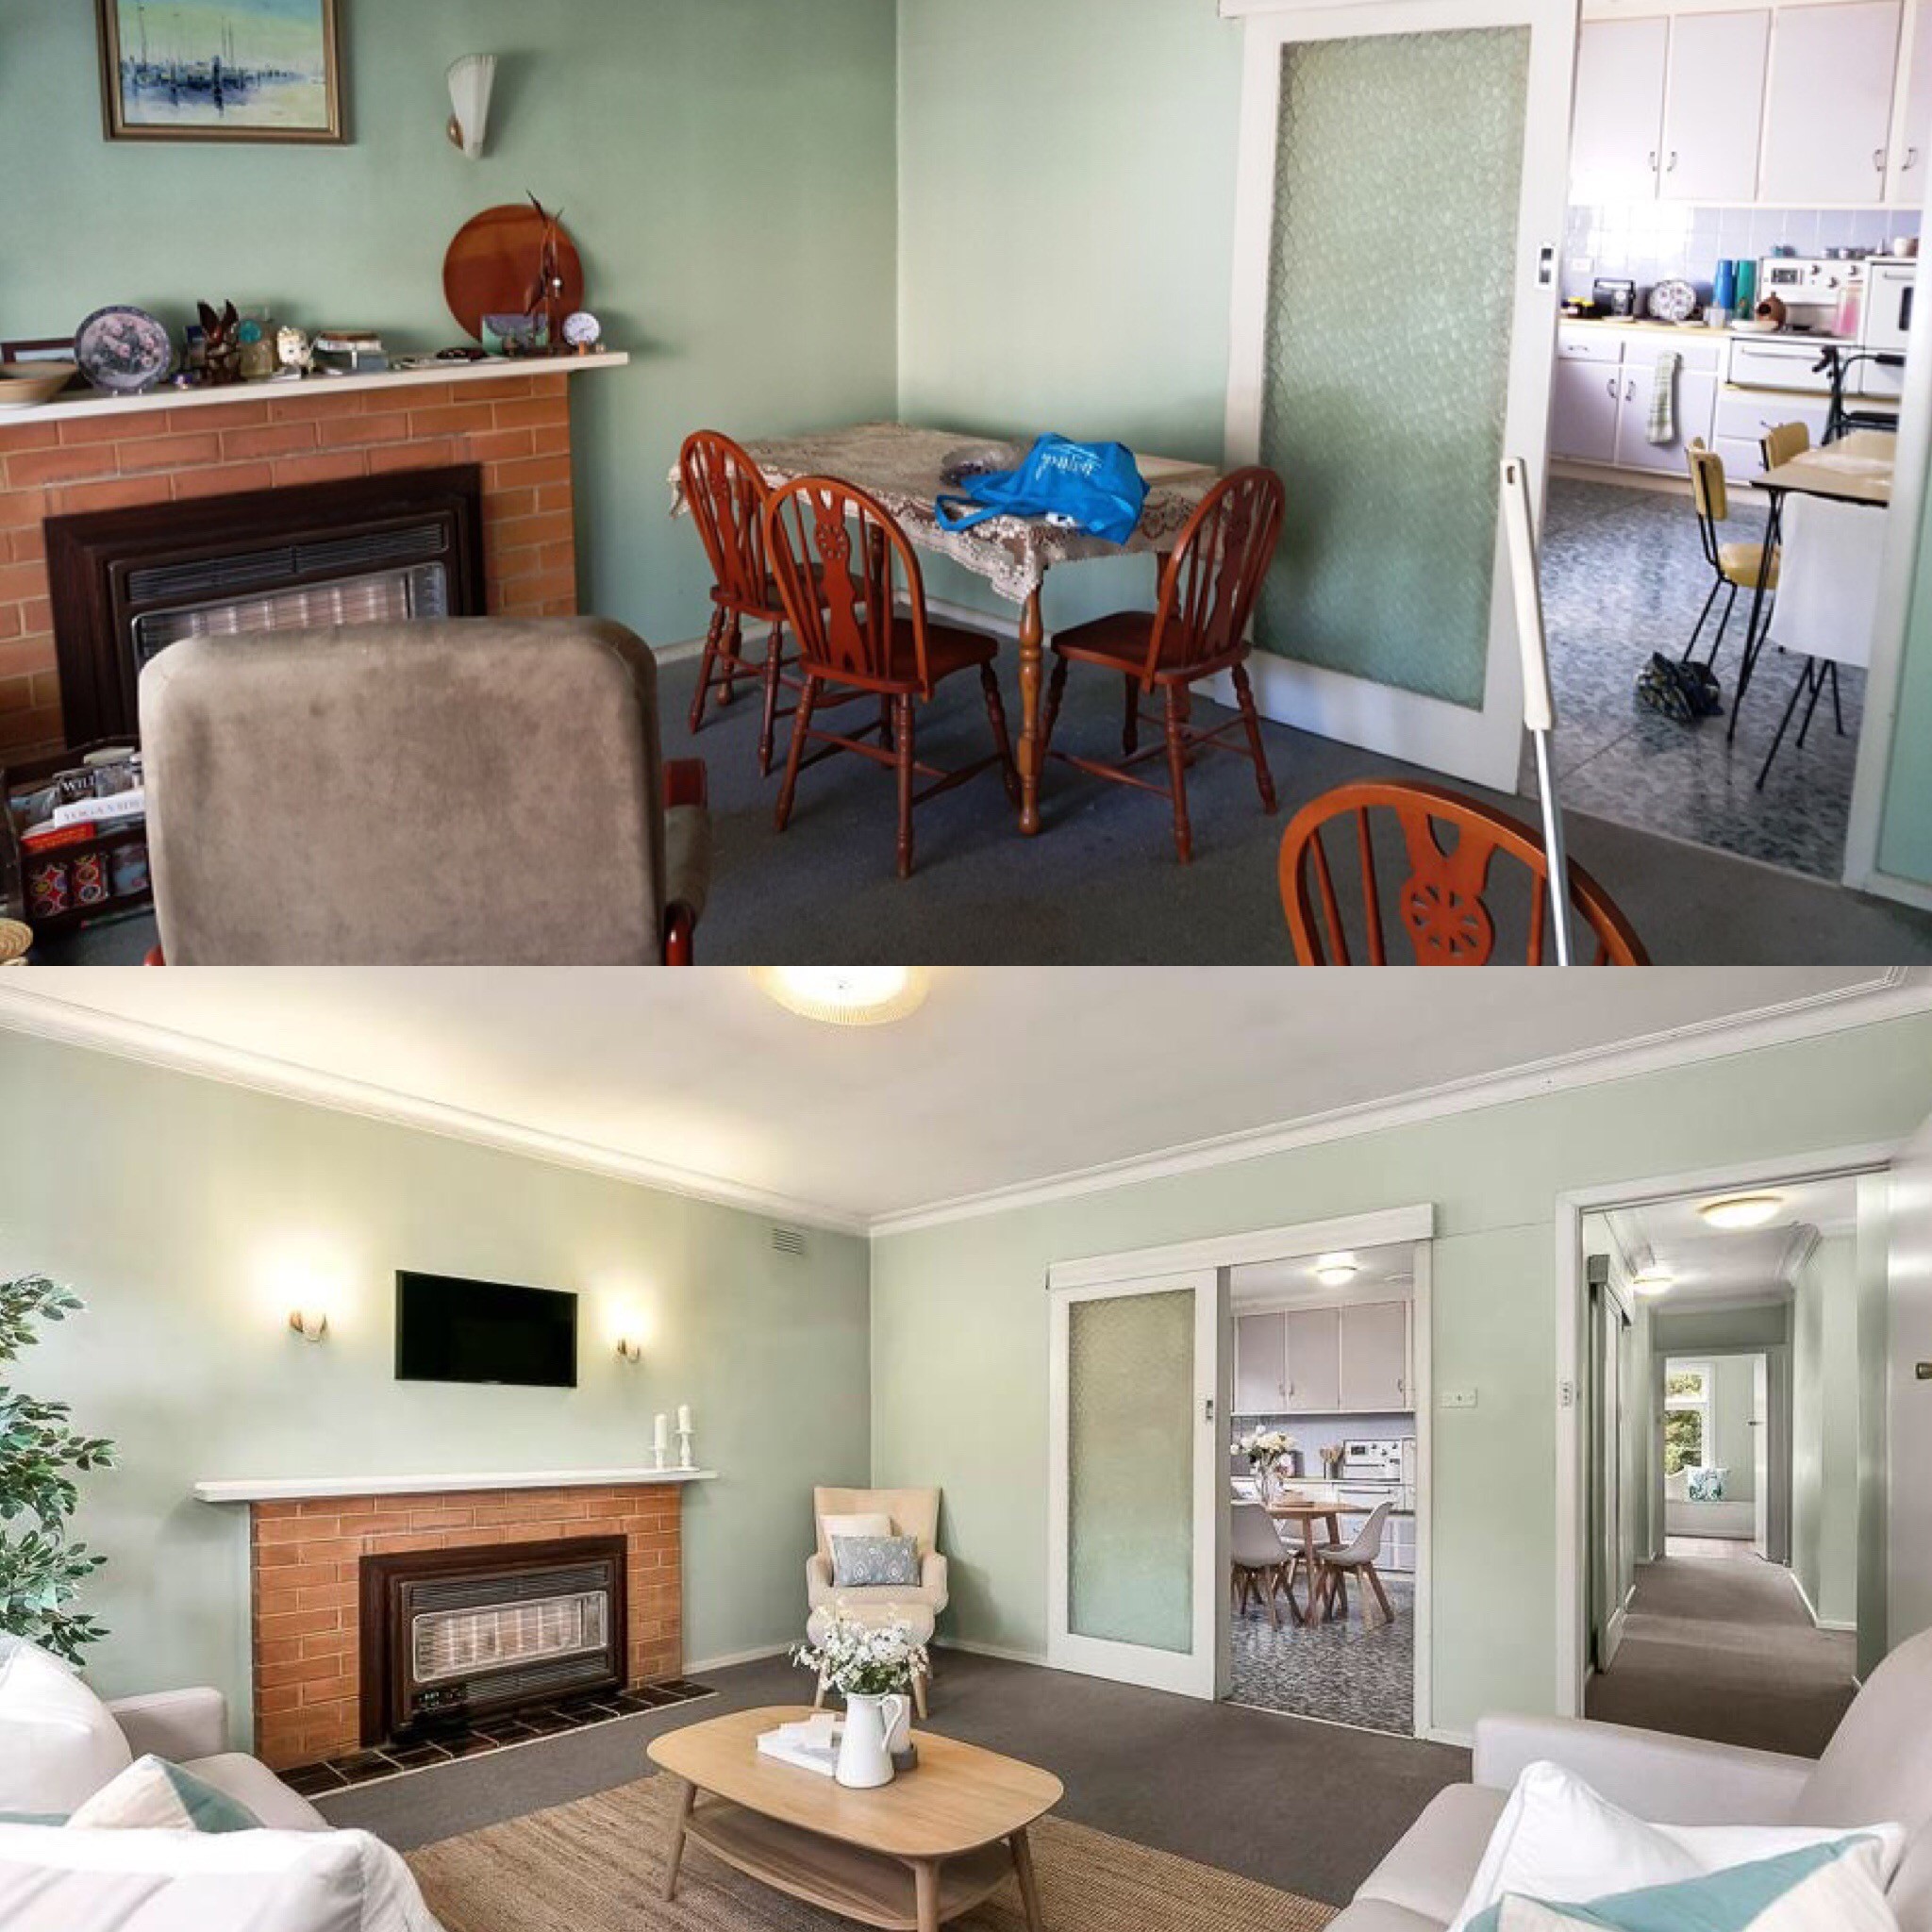 lounge 2 before after 43 greenways.jpg